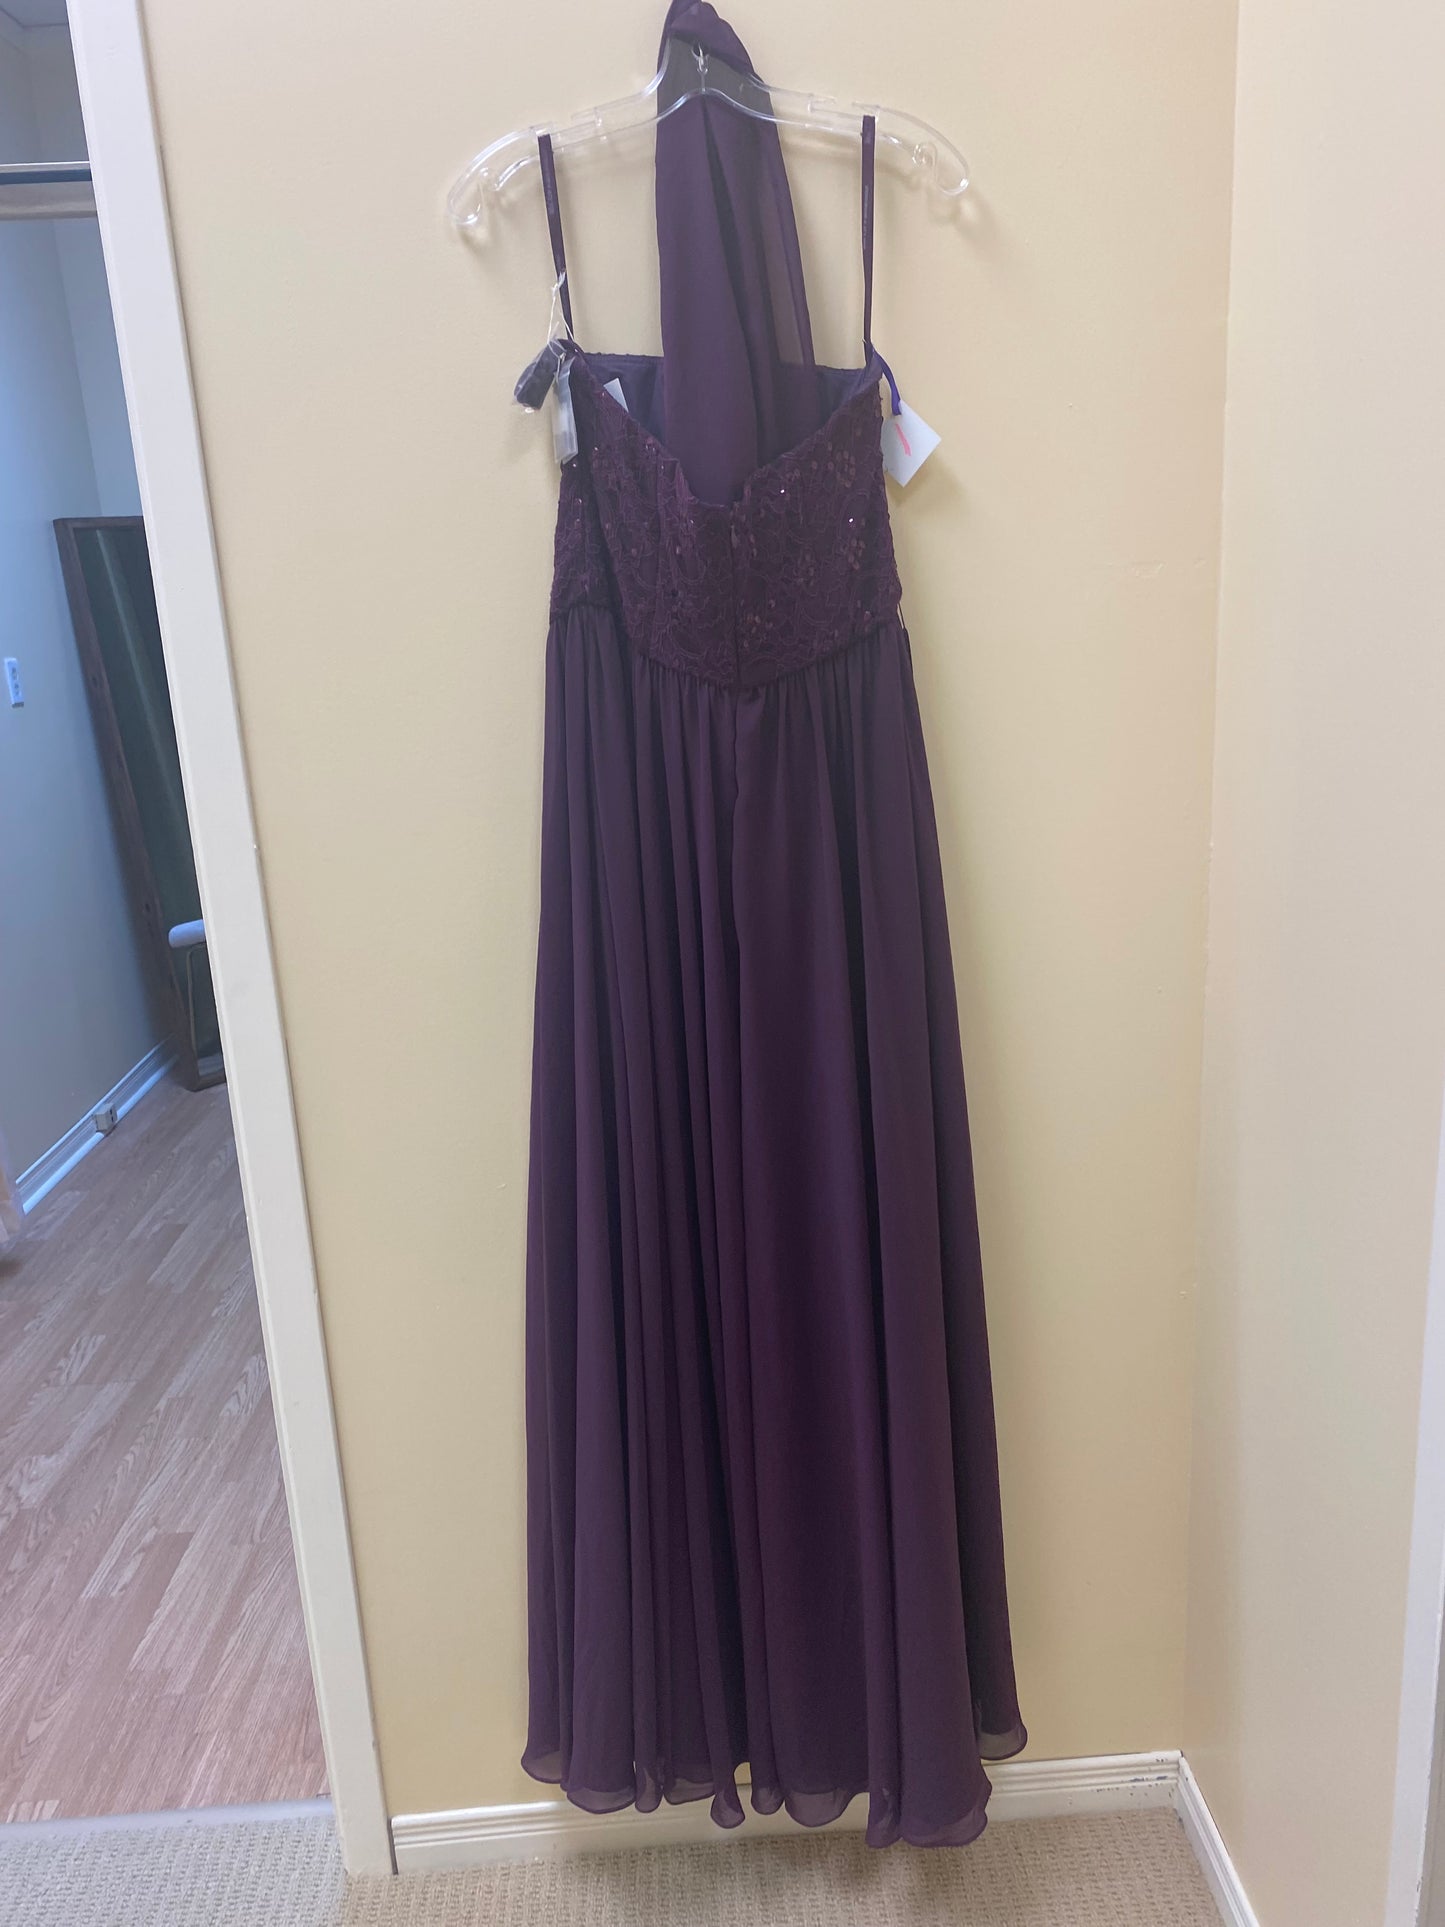 MORI LEE - 128 - Eggplant Size 14 Long Prom / Mother of the Bride / Bridesmaid Dress